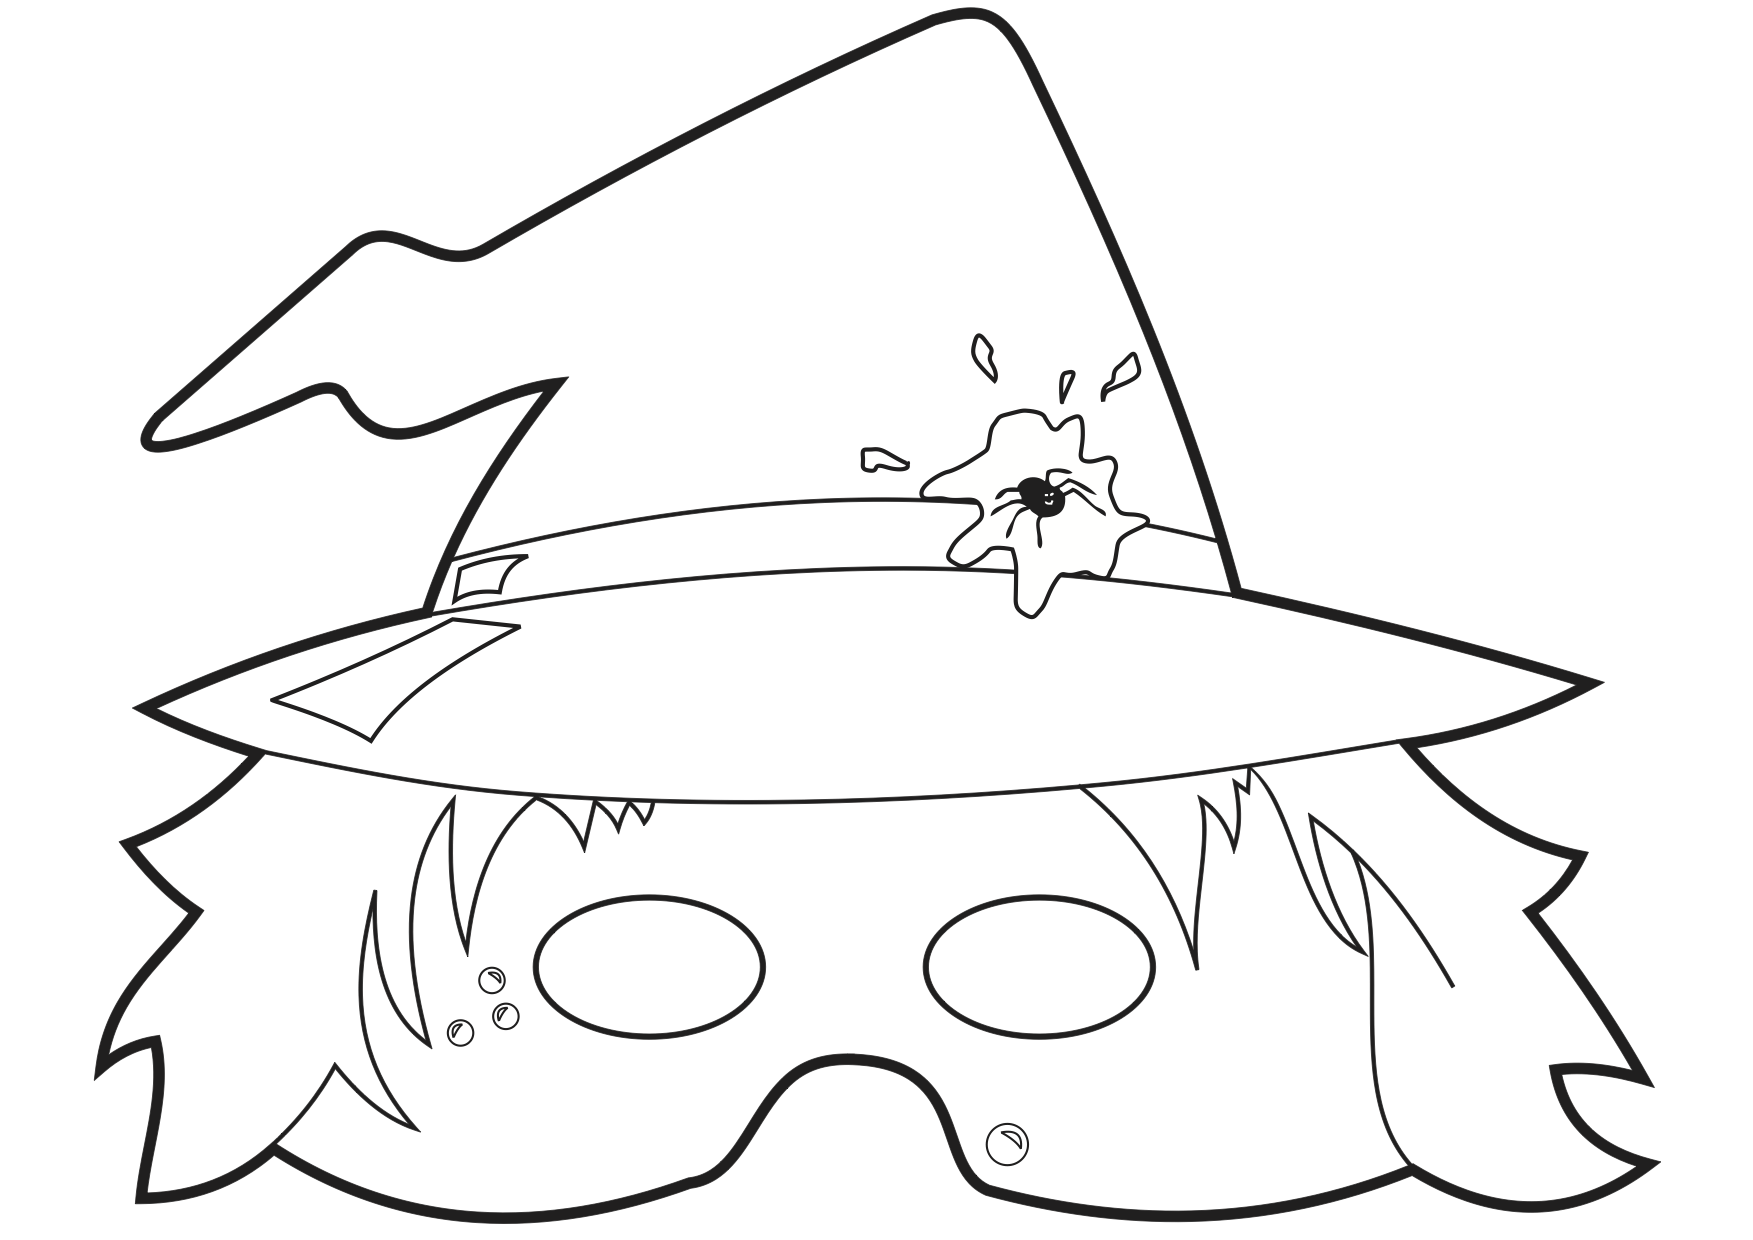 Favorite Halloween Mask Coloring Page